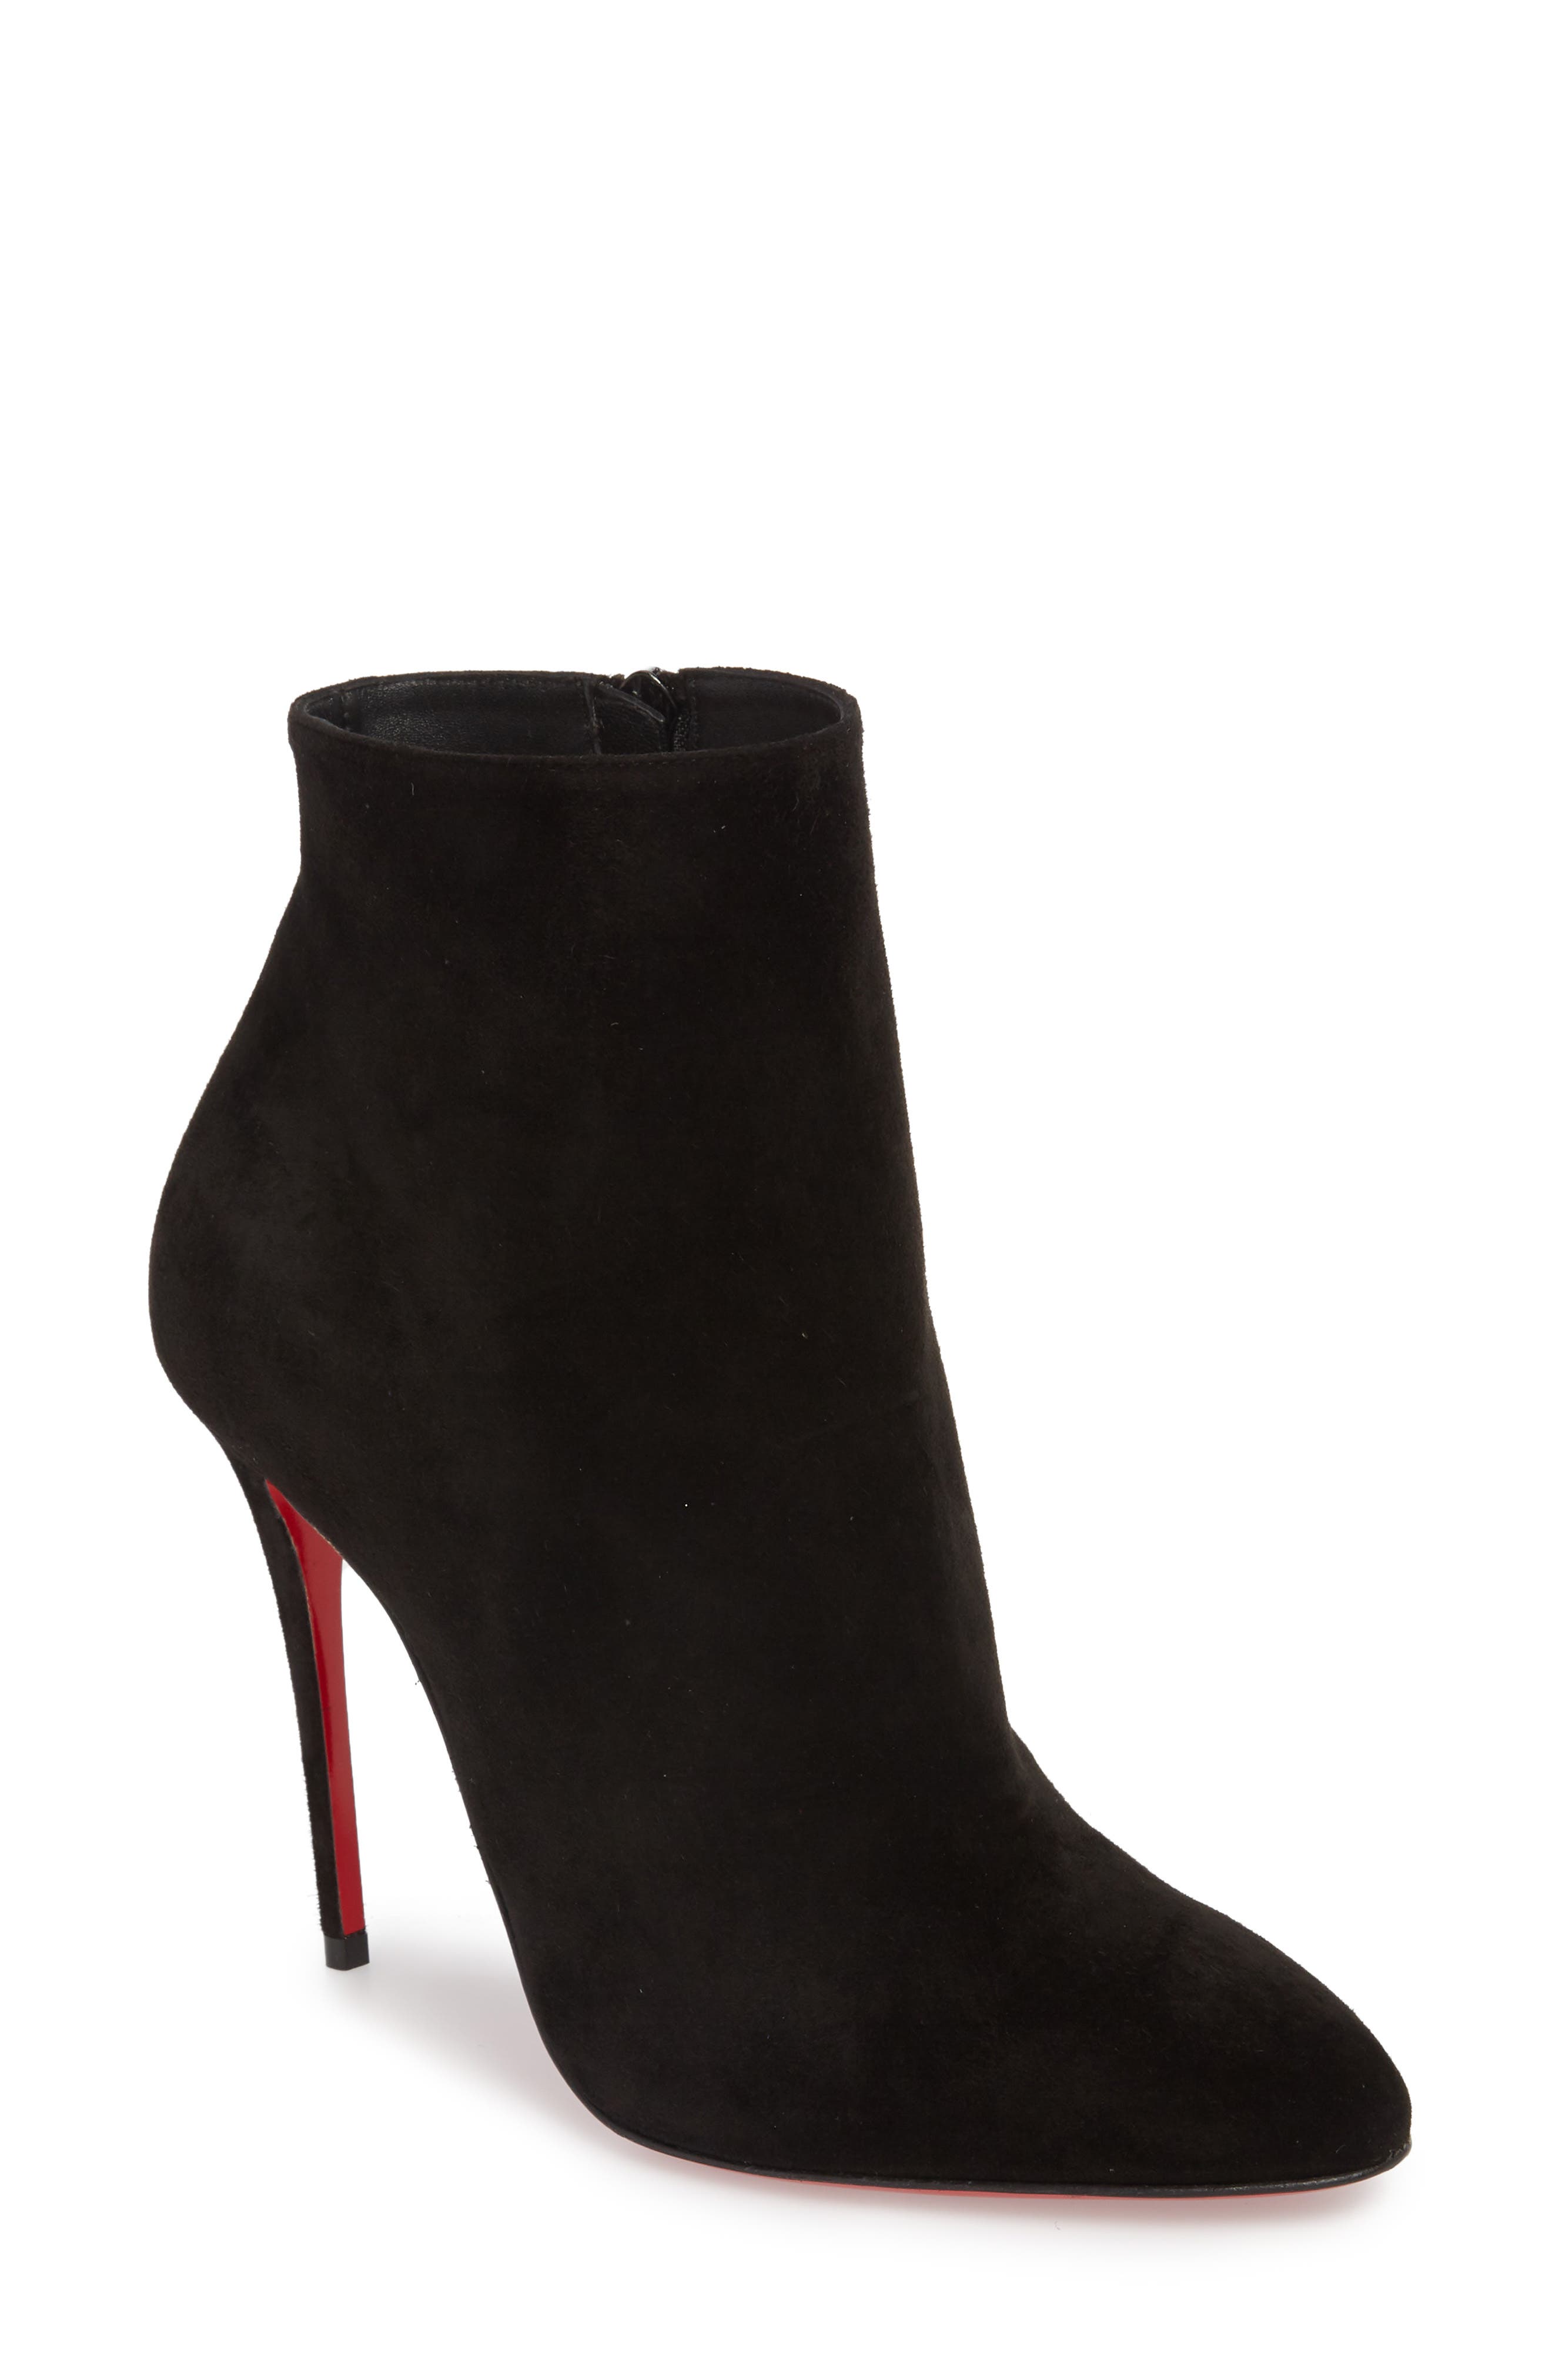 christian louboutin boots nordstrom